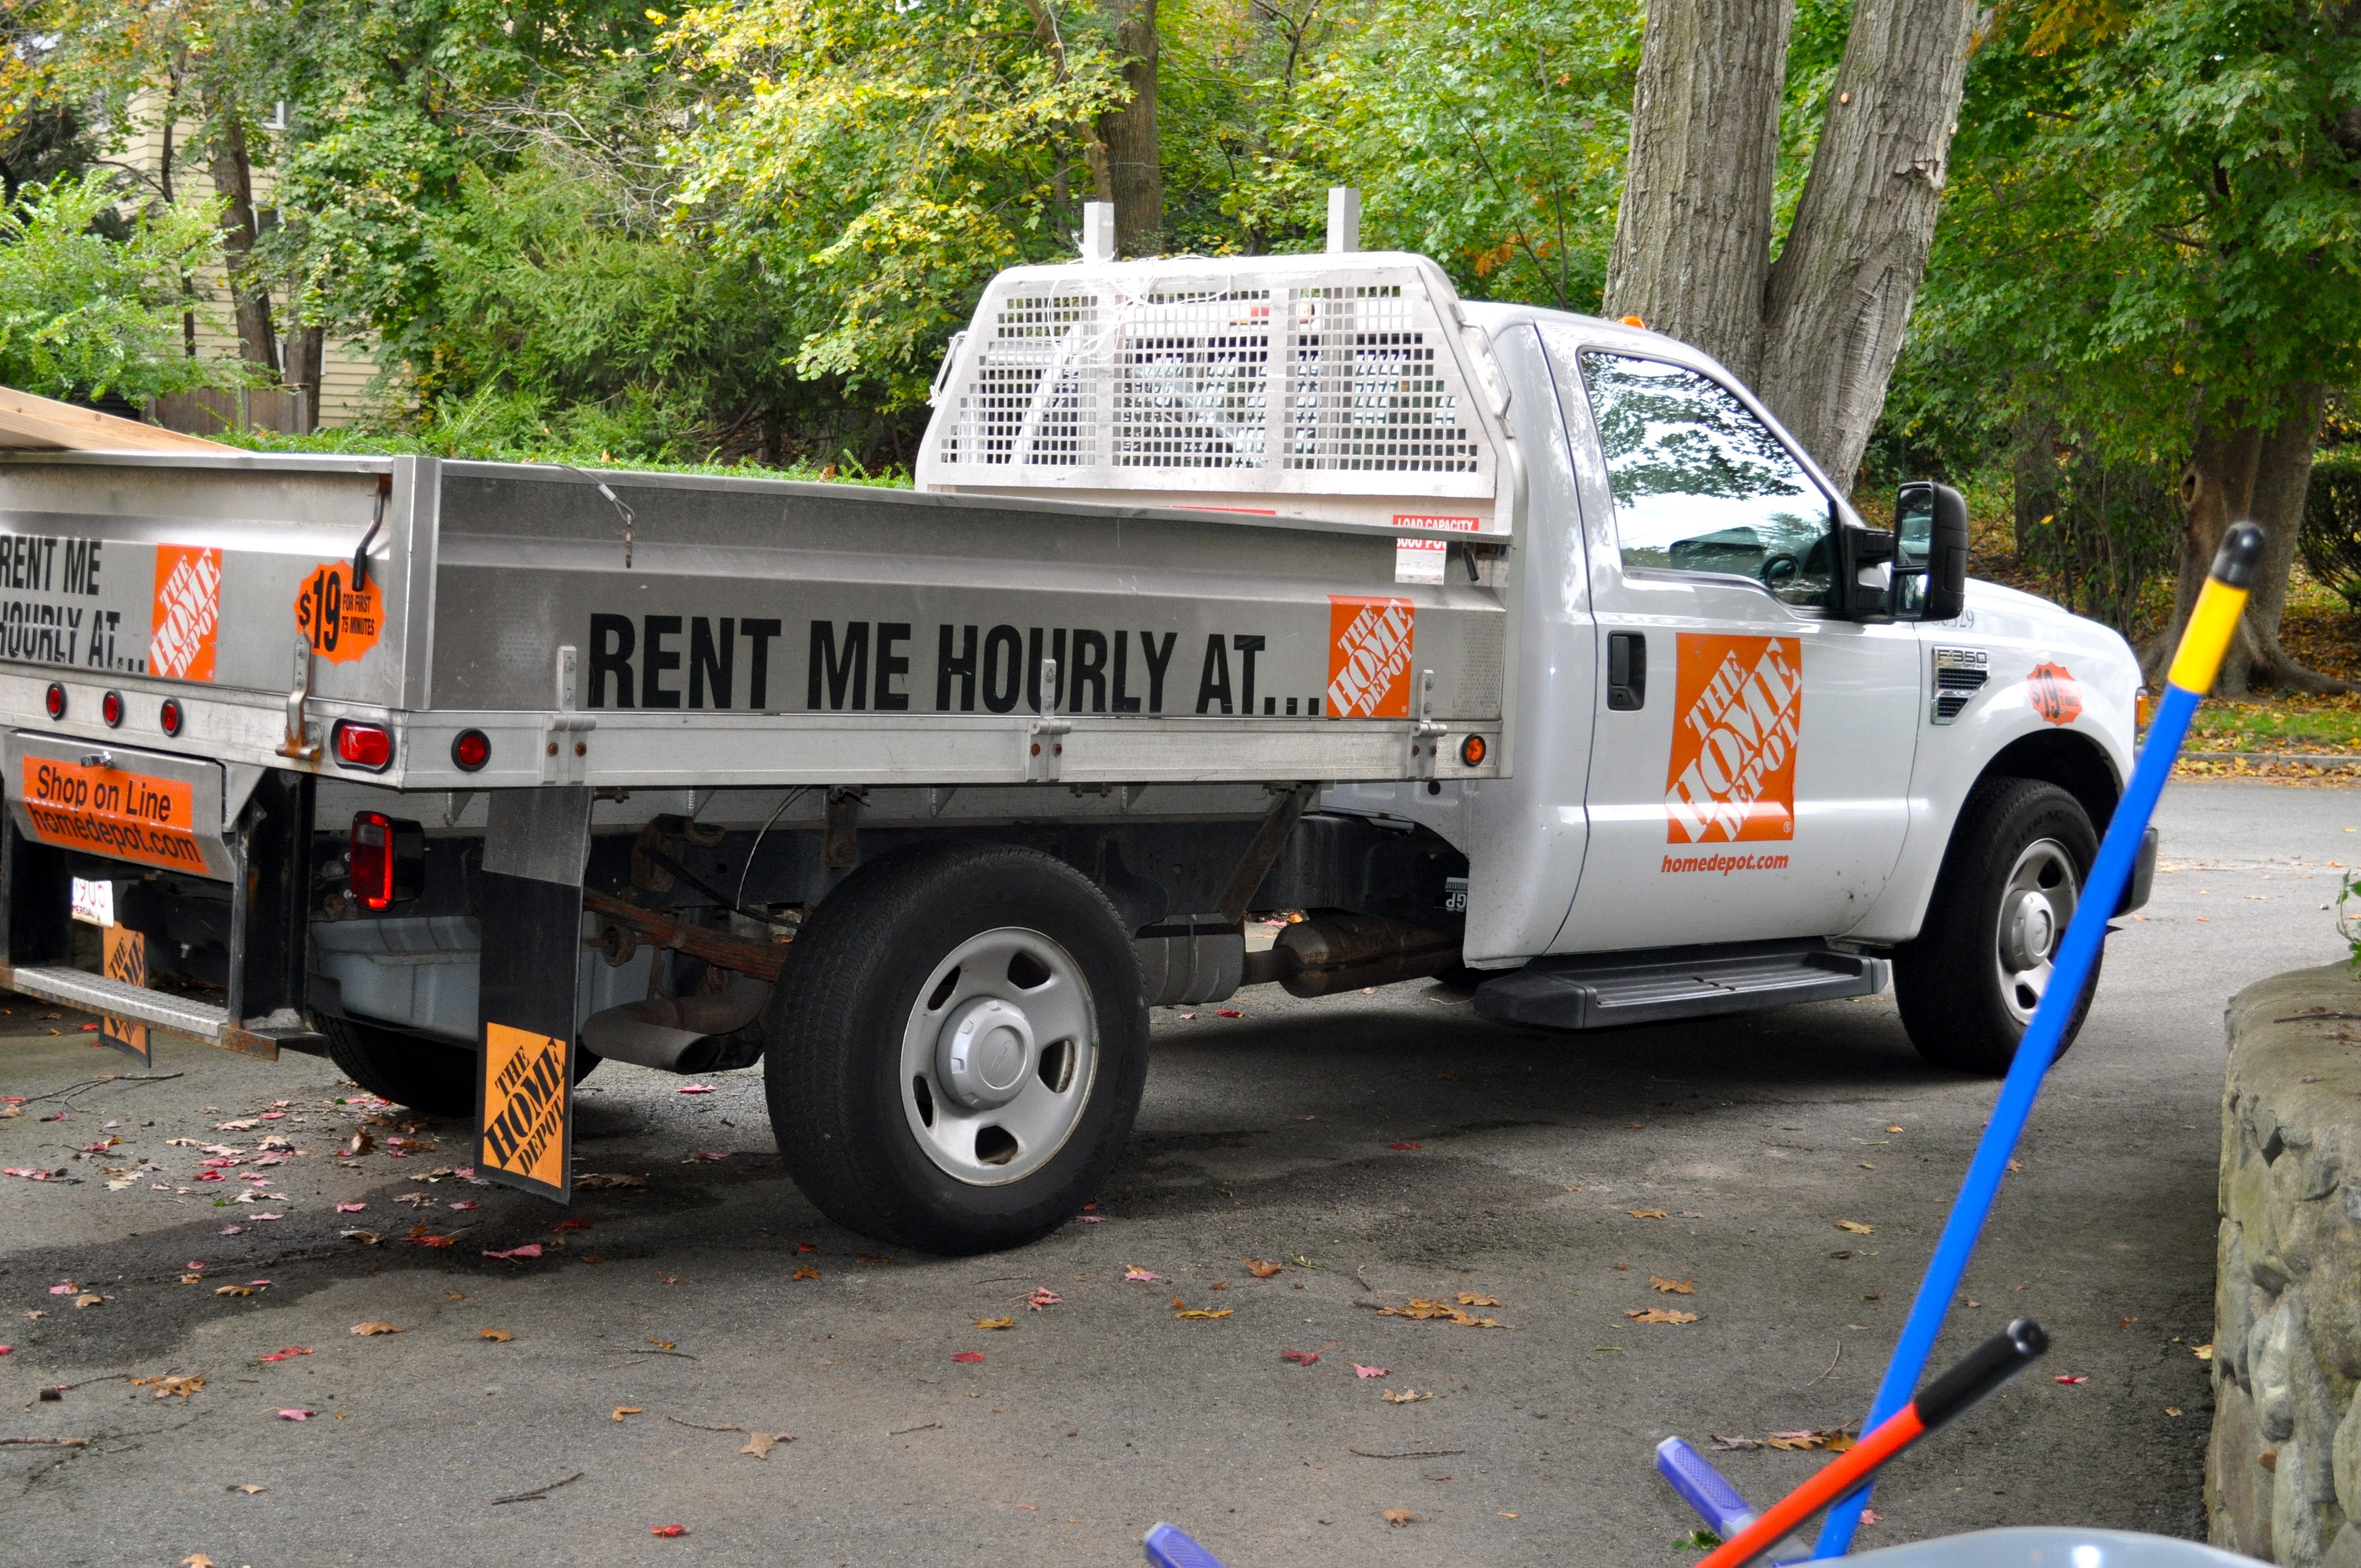 How Much Does Home Depot Charge To Rent A Truck